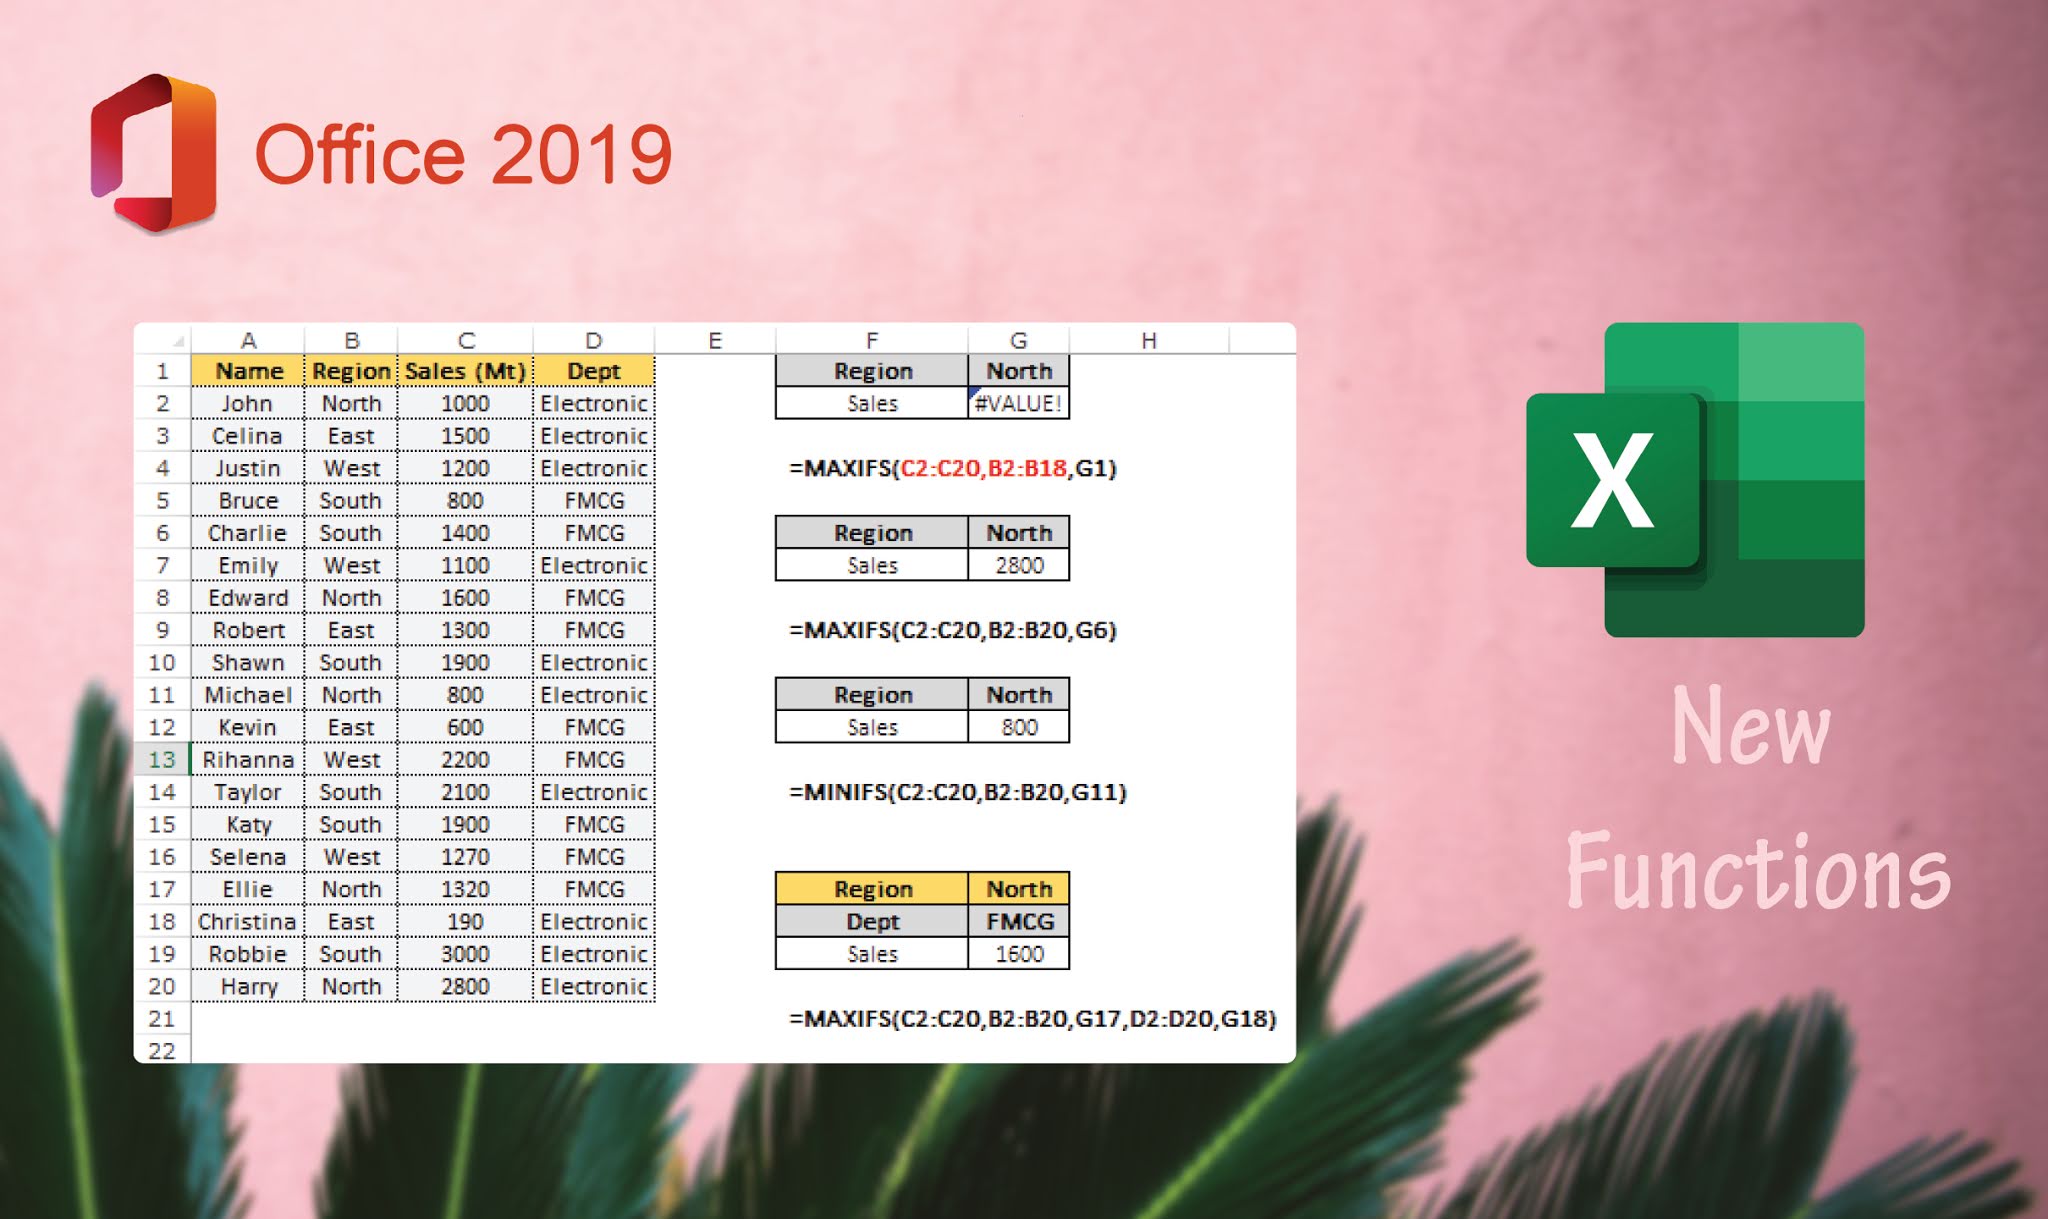 New Functions in Excel 2019